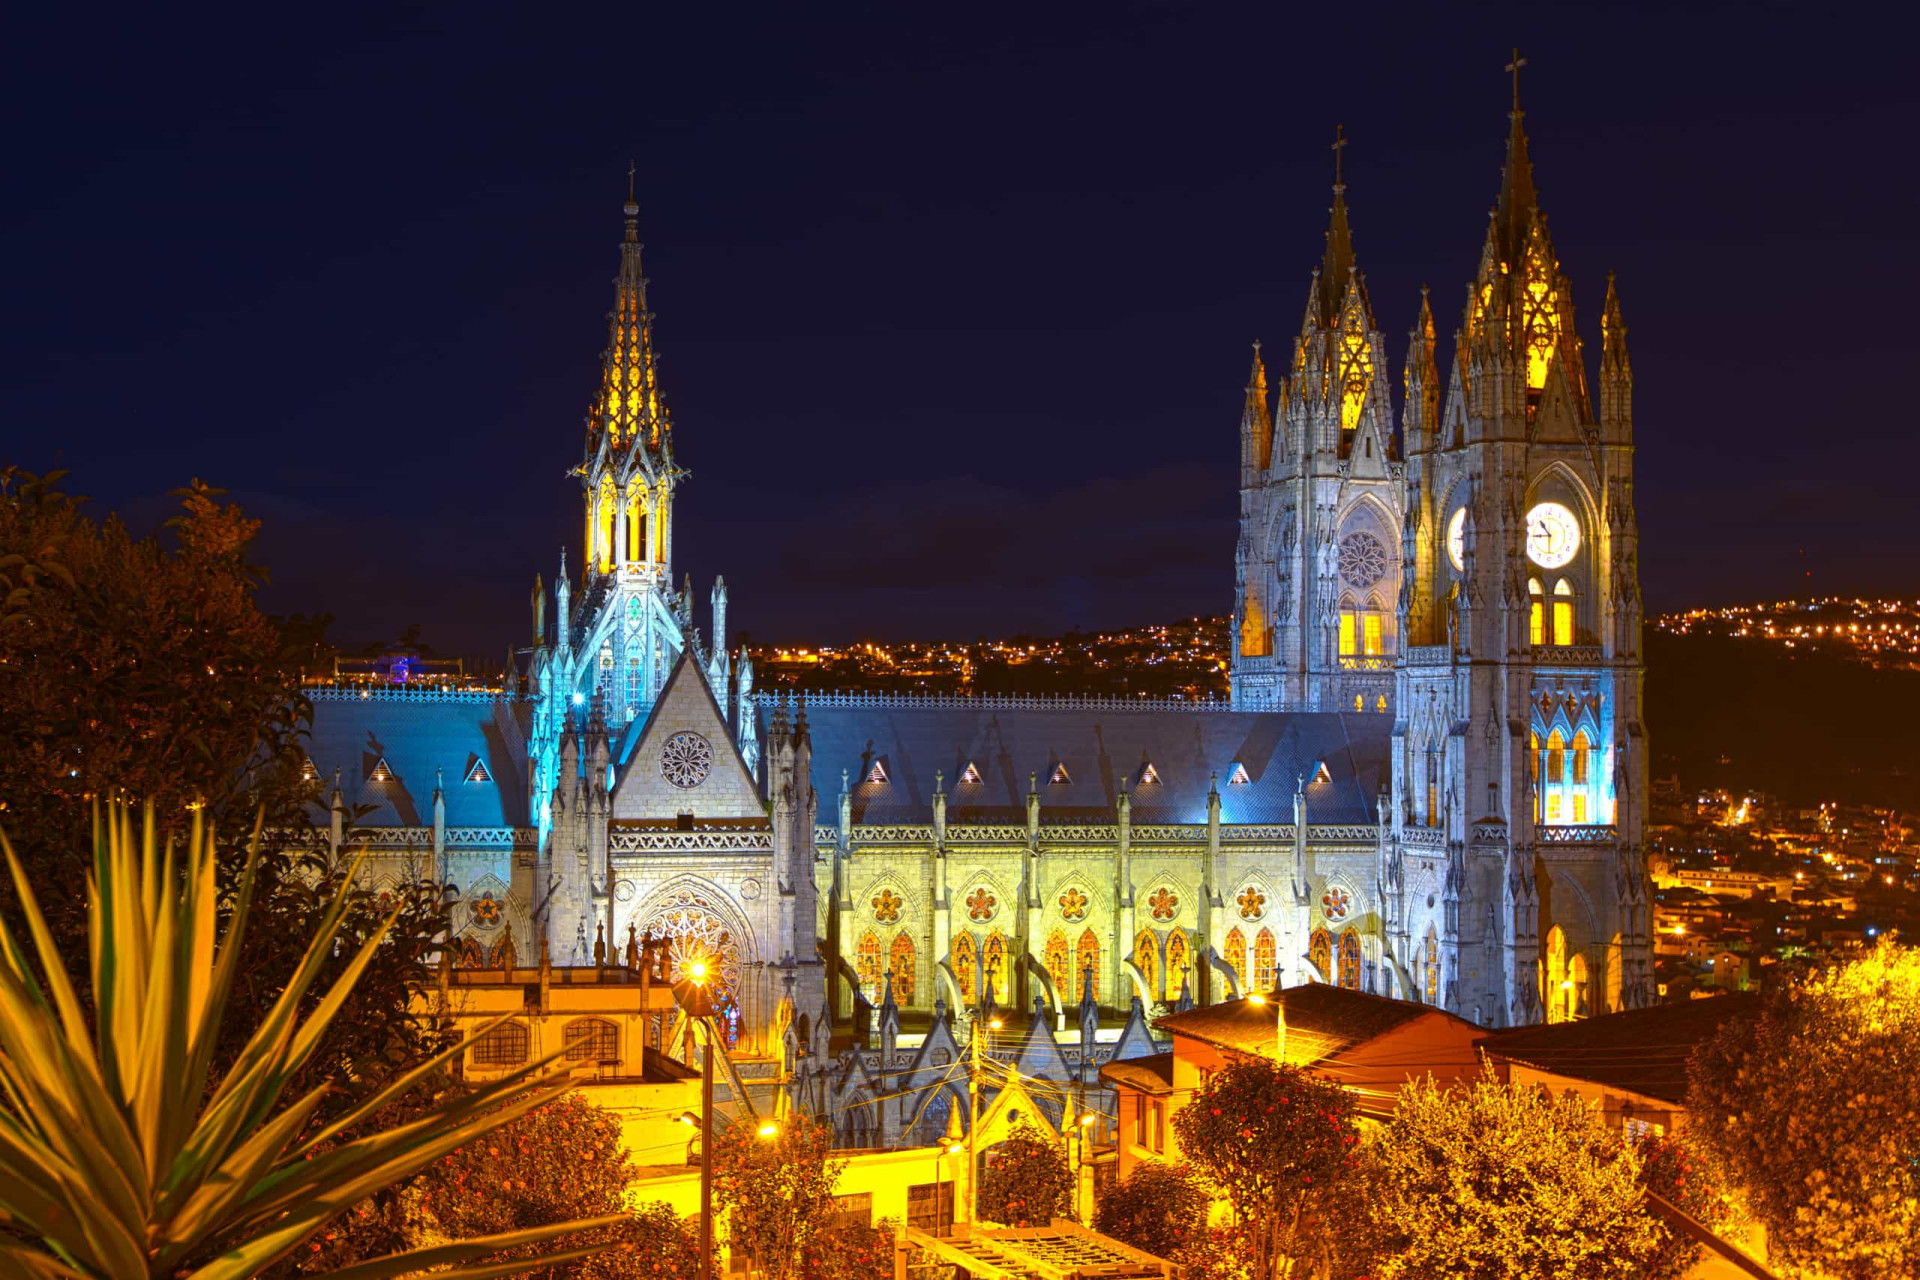 Location: Quito<br>Criteria: Cultural<br>Year established: 1978<br>Description: The historic center of Quito is one of the largest, least altered and best-preserved historic centers in Latin America. The city was founded in 1534.<p>You may also like:<a href="https://www.starsinsider.com/n/184478?utm_source=msn.com&utm_medium=display&utm_campaign=referral_description&utm_content=413555v12en-us"> The most picturesque mountain towns in America</a></p>